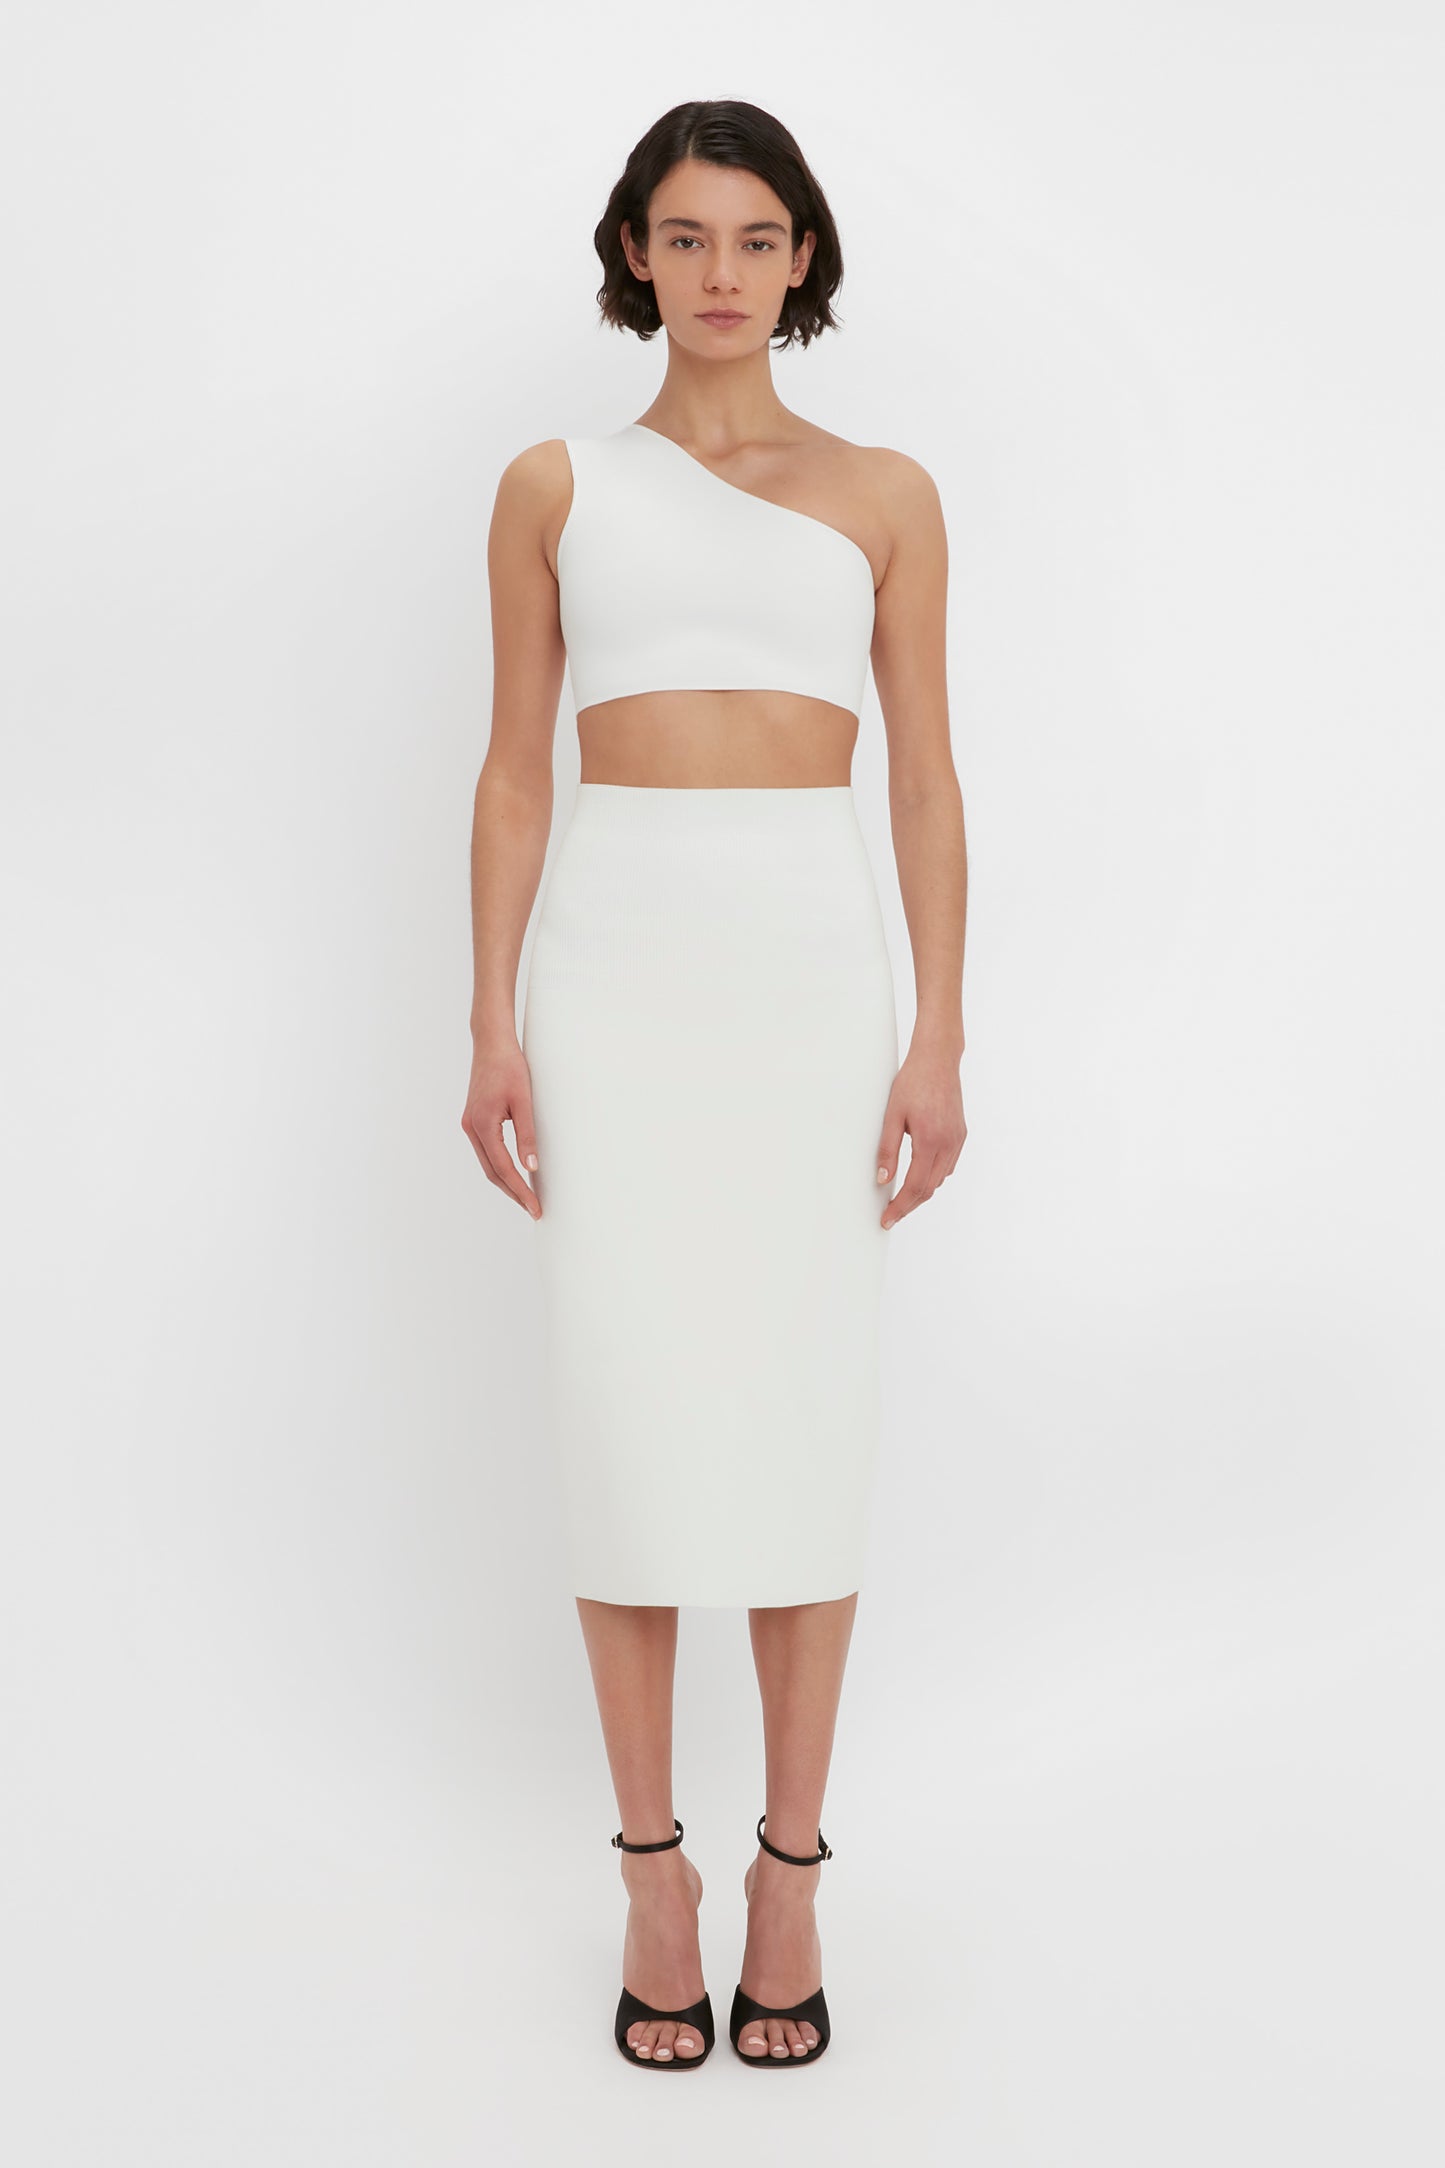 VB Body One Shoulder Crop Top In White